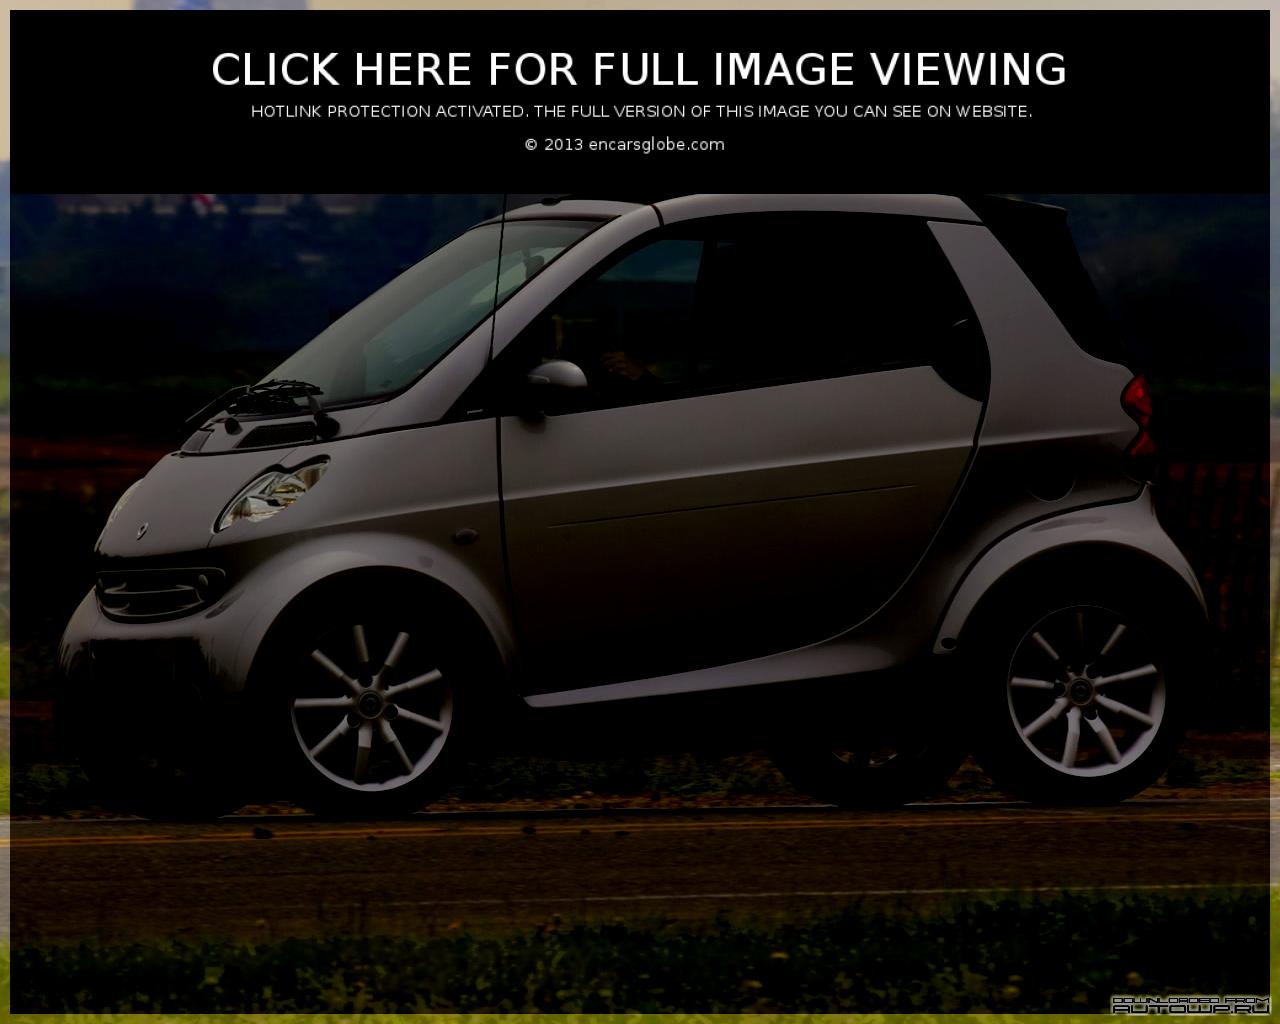 Smart City Cabrio Photo Gallery: Photo #07 out of 11, Image Size ...